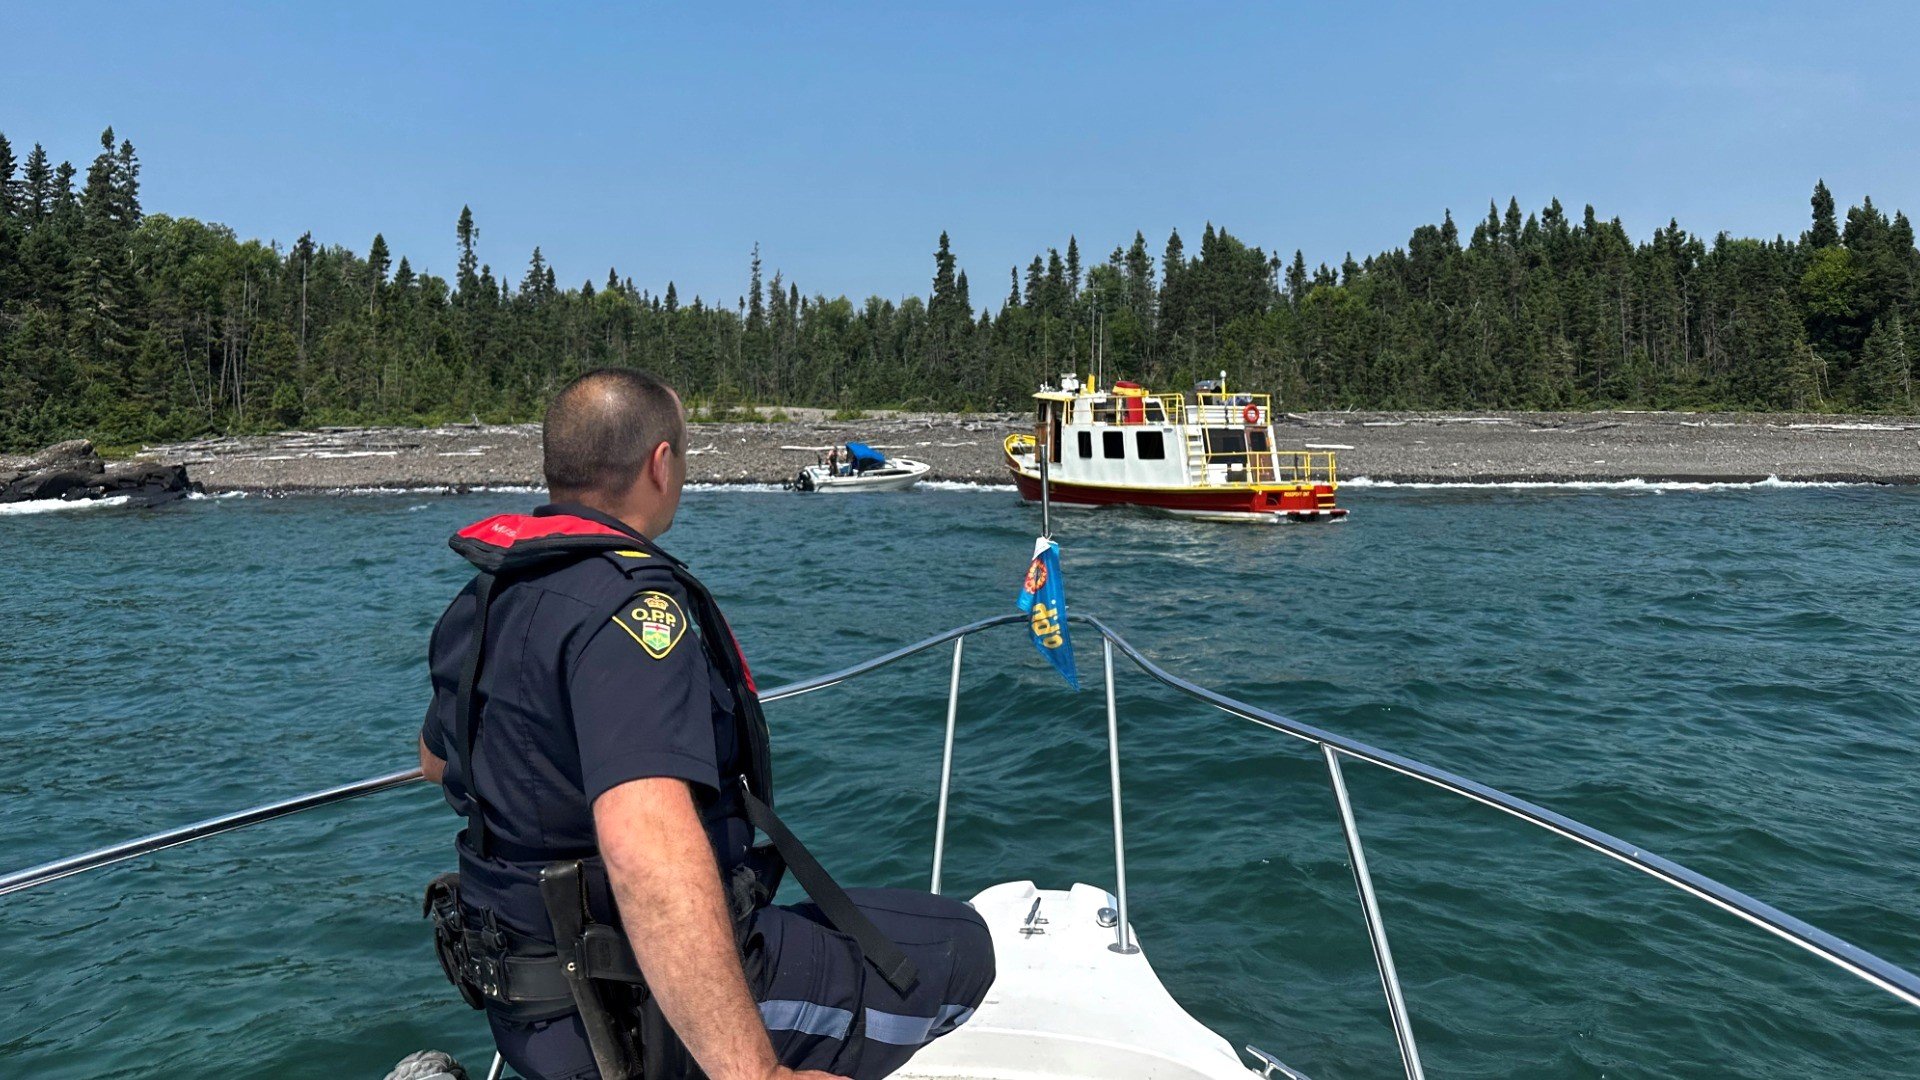 Boaters stranded on Lake Superior rescued in northern Ontario